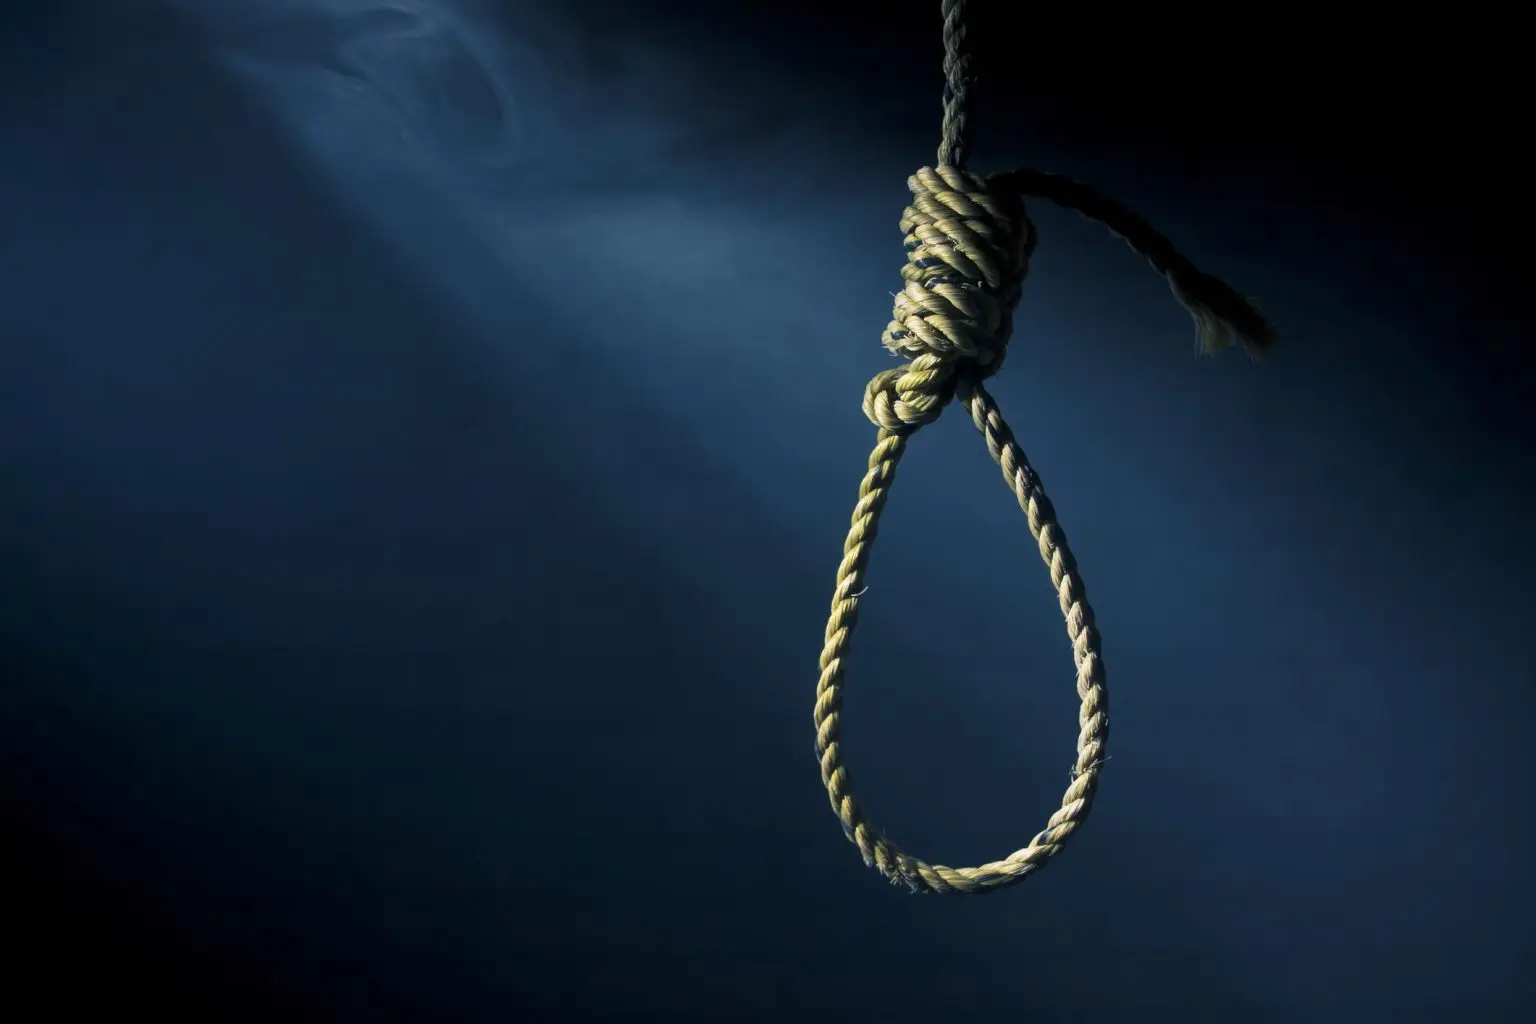 Court sentences man to death by hanging for killing his brother in Ekiti